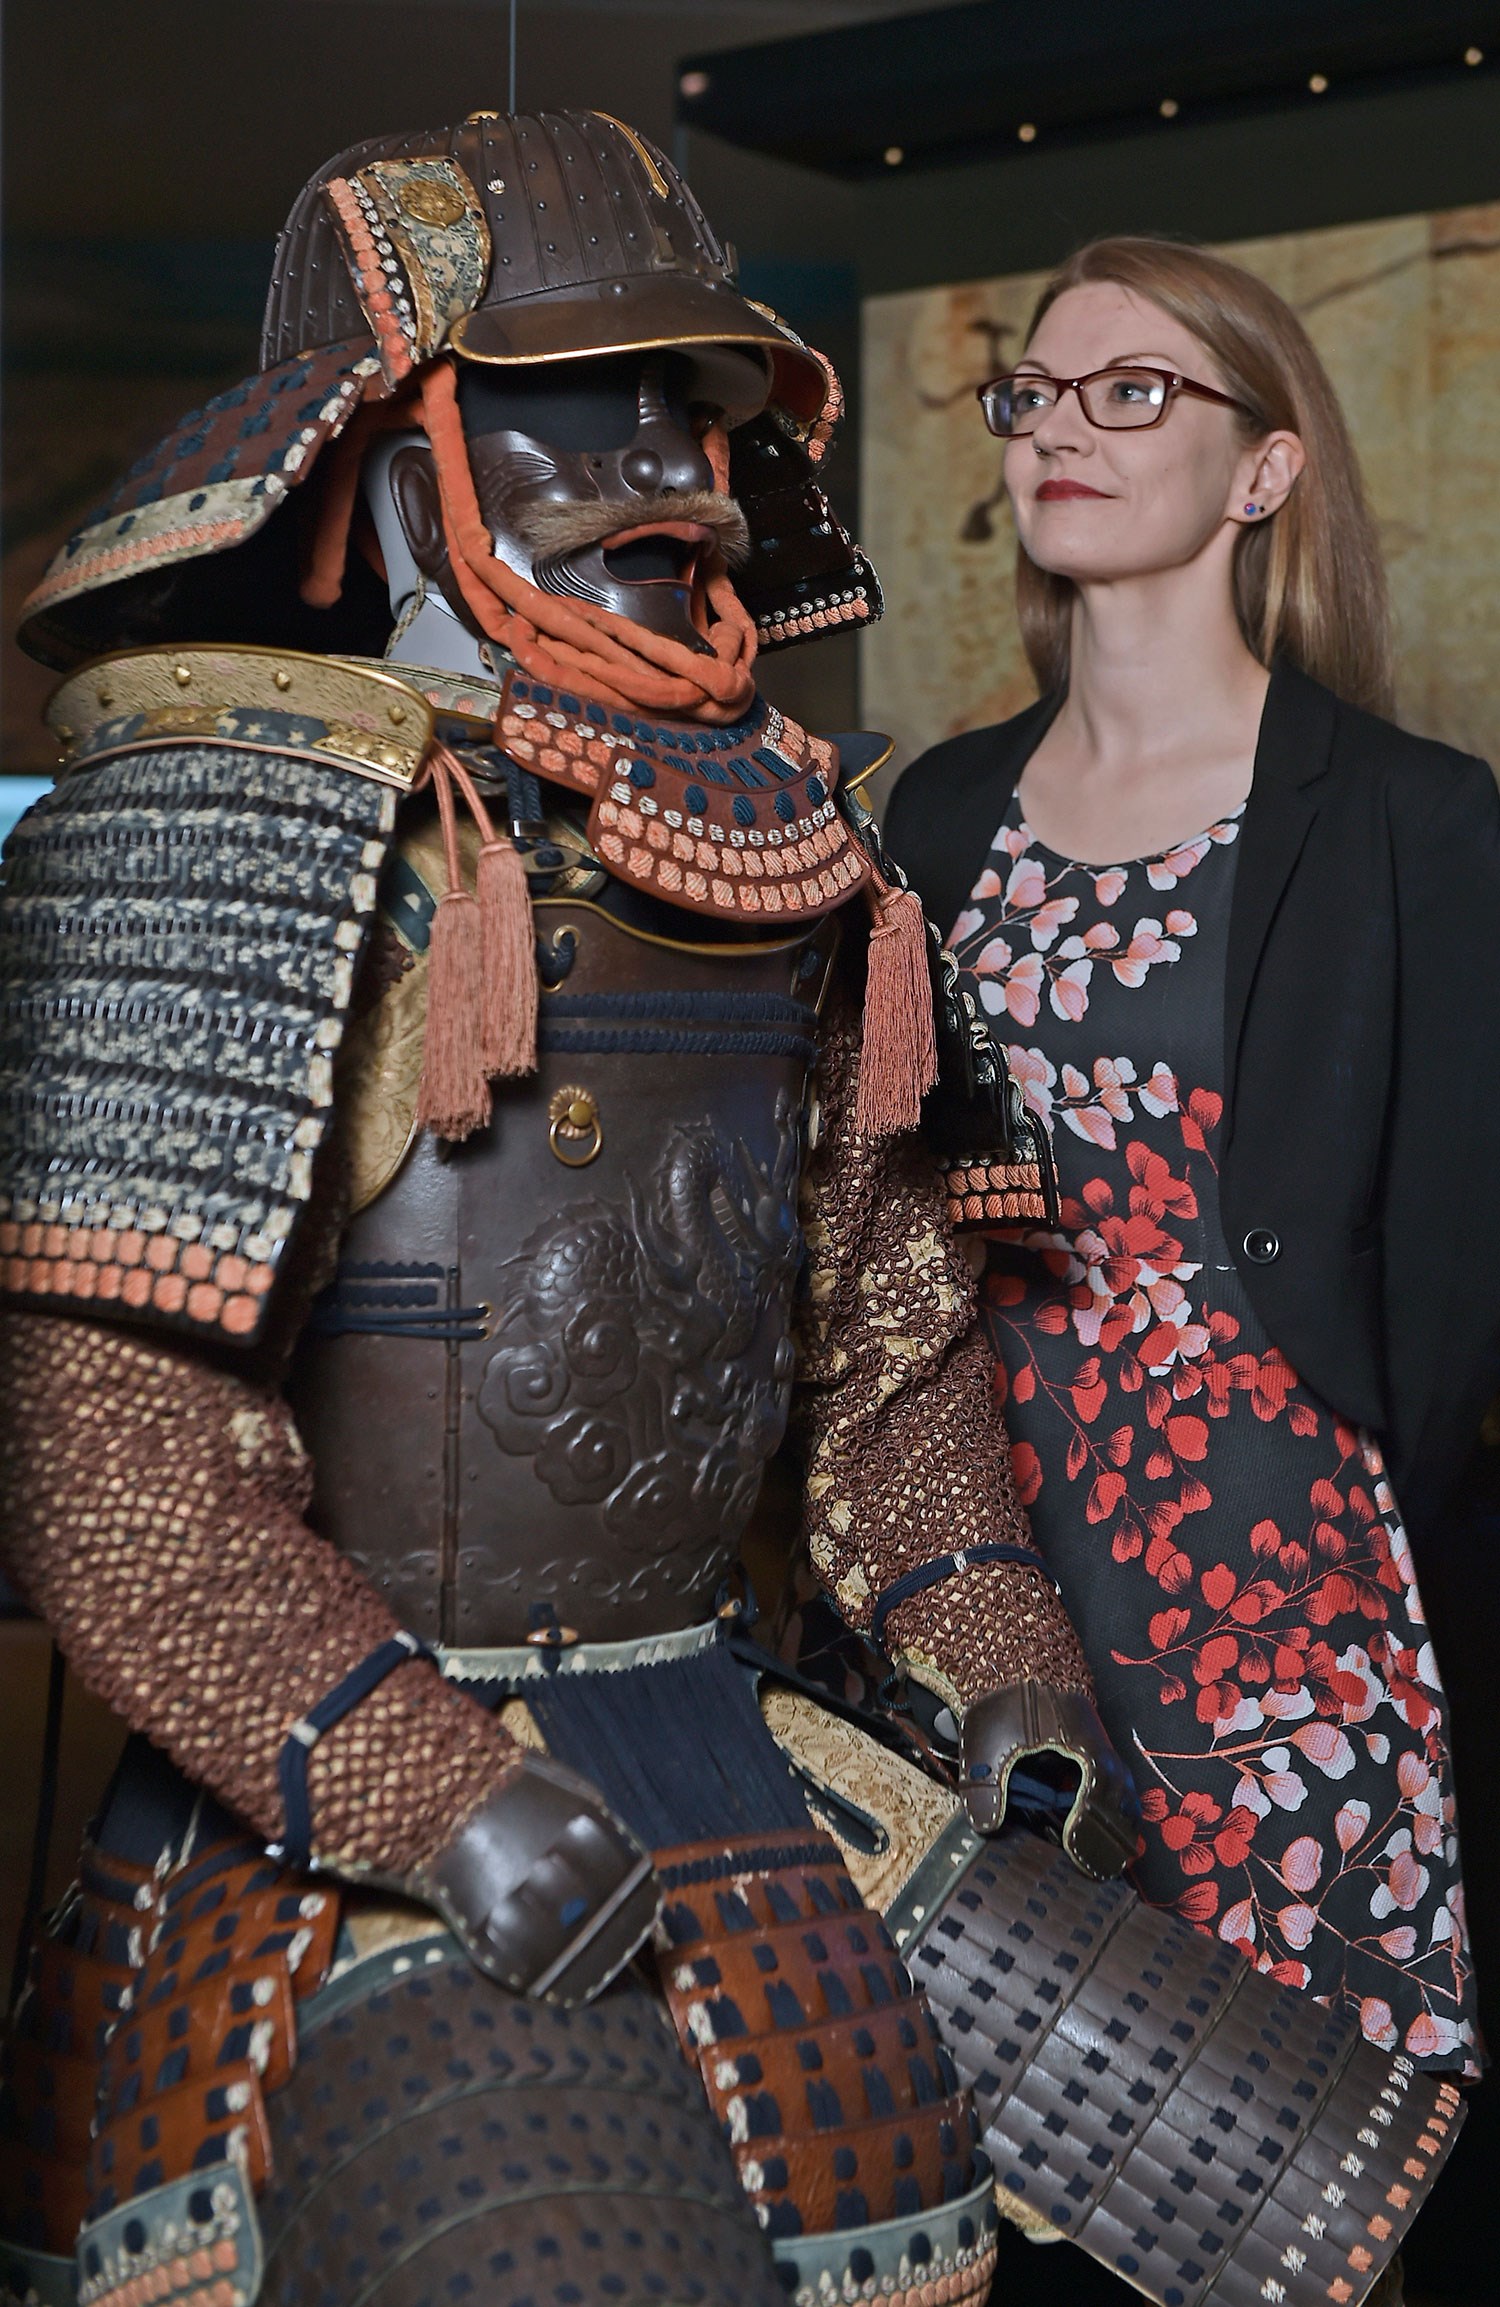 Japanese suit of samurai armour in the Exploring East Asia gallery.